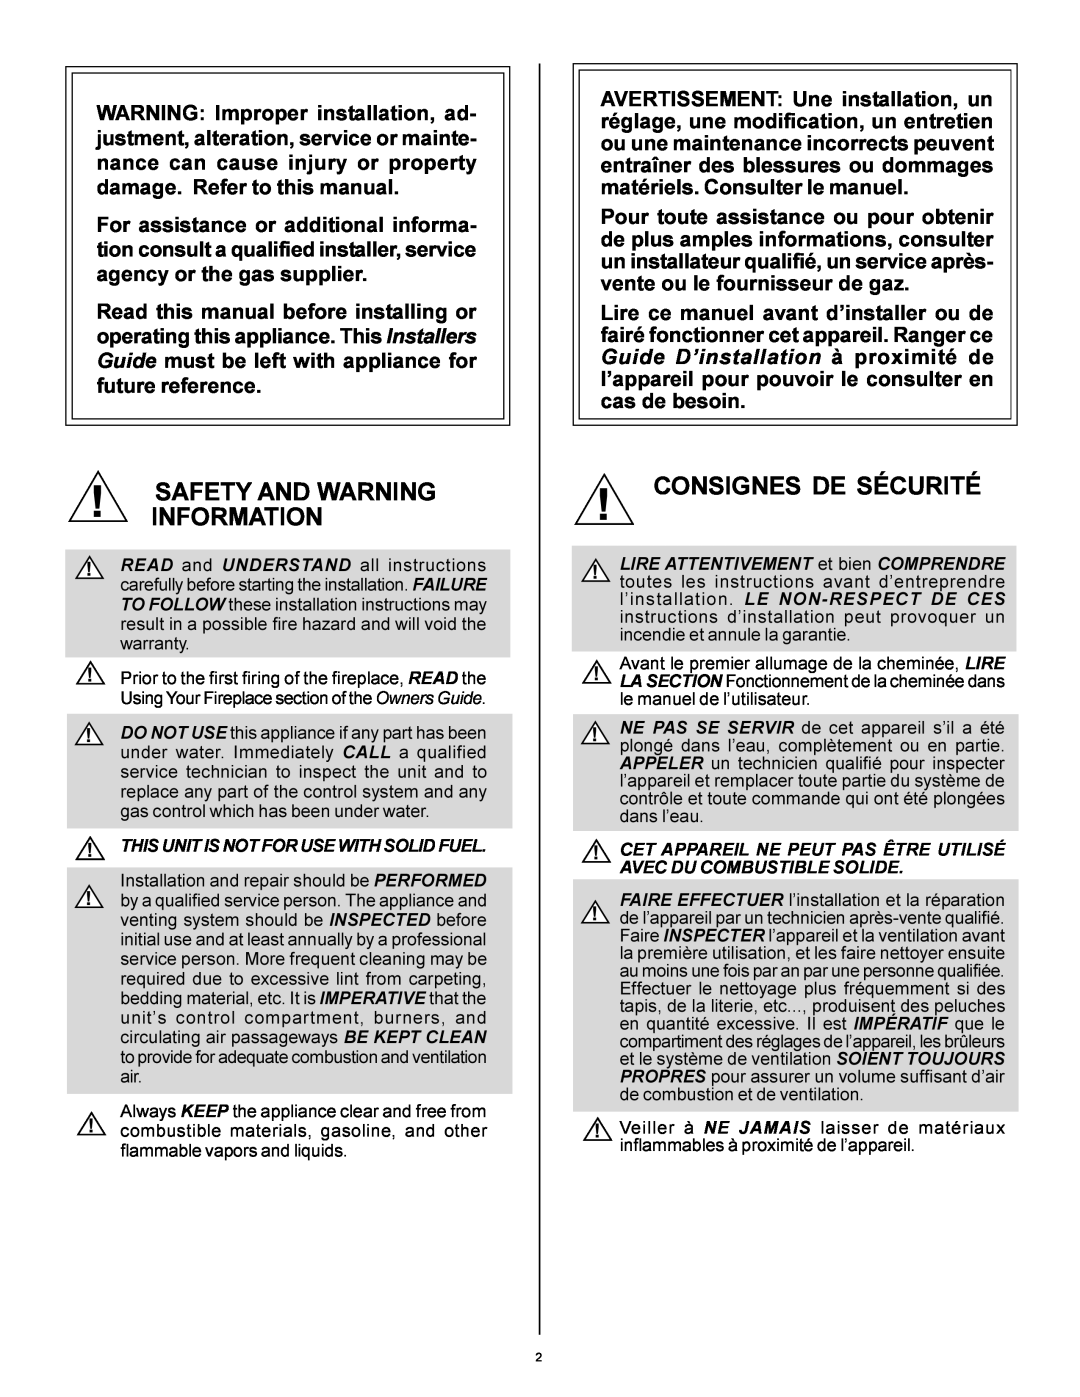 Heat & Glo LifeStyle AT-GRAND-D manual Safety And Warning Information, Consignes De Sécurité 